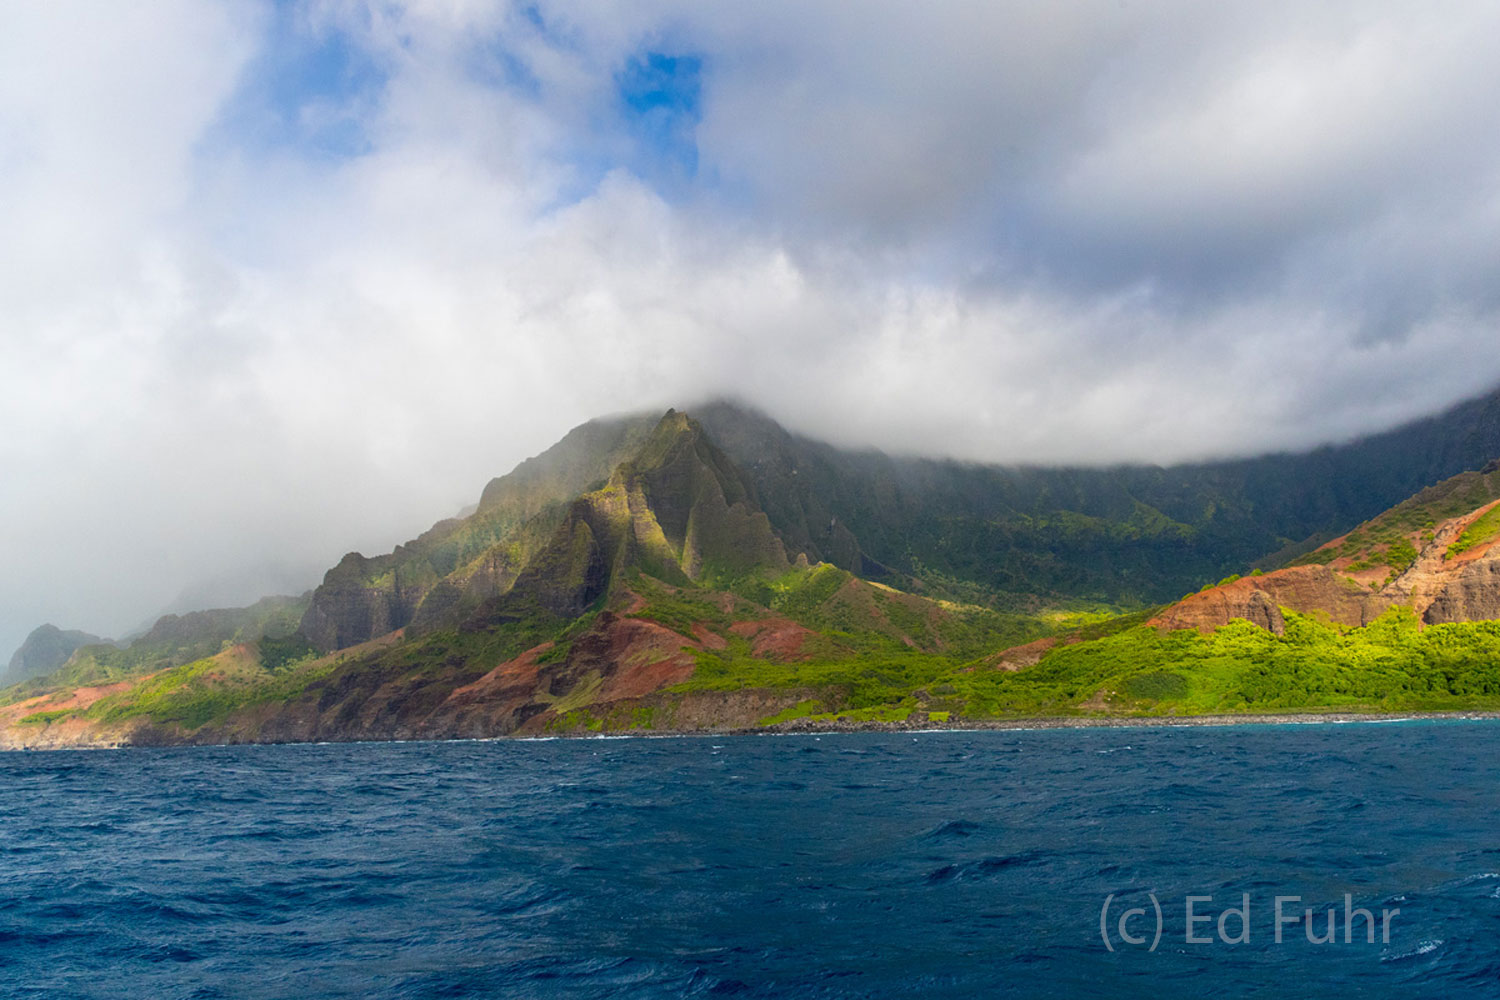 Another of my favorite images of the Na Pali coast, this photo captures its color and balance, with clouds and hints of blue...